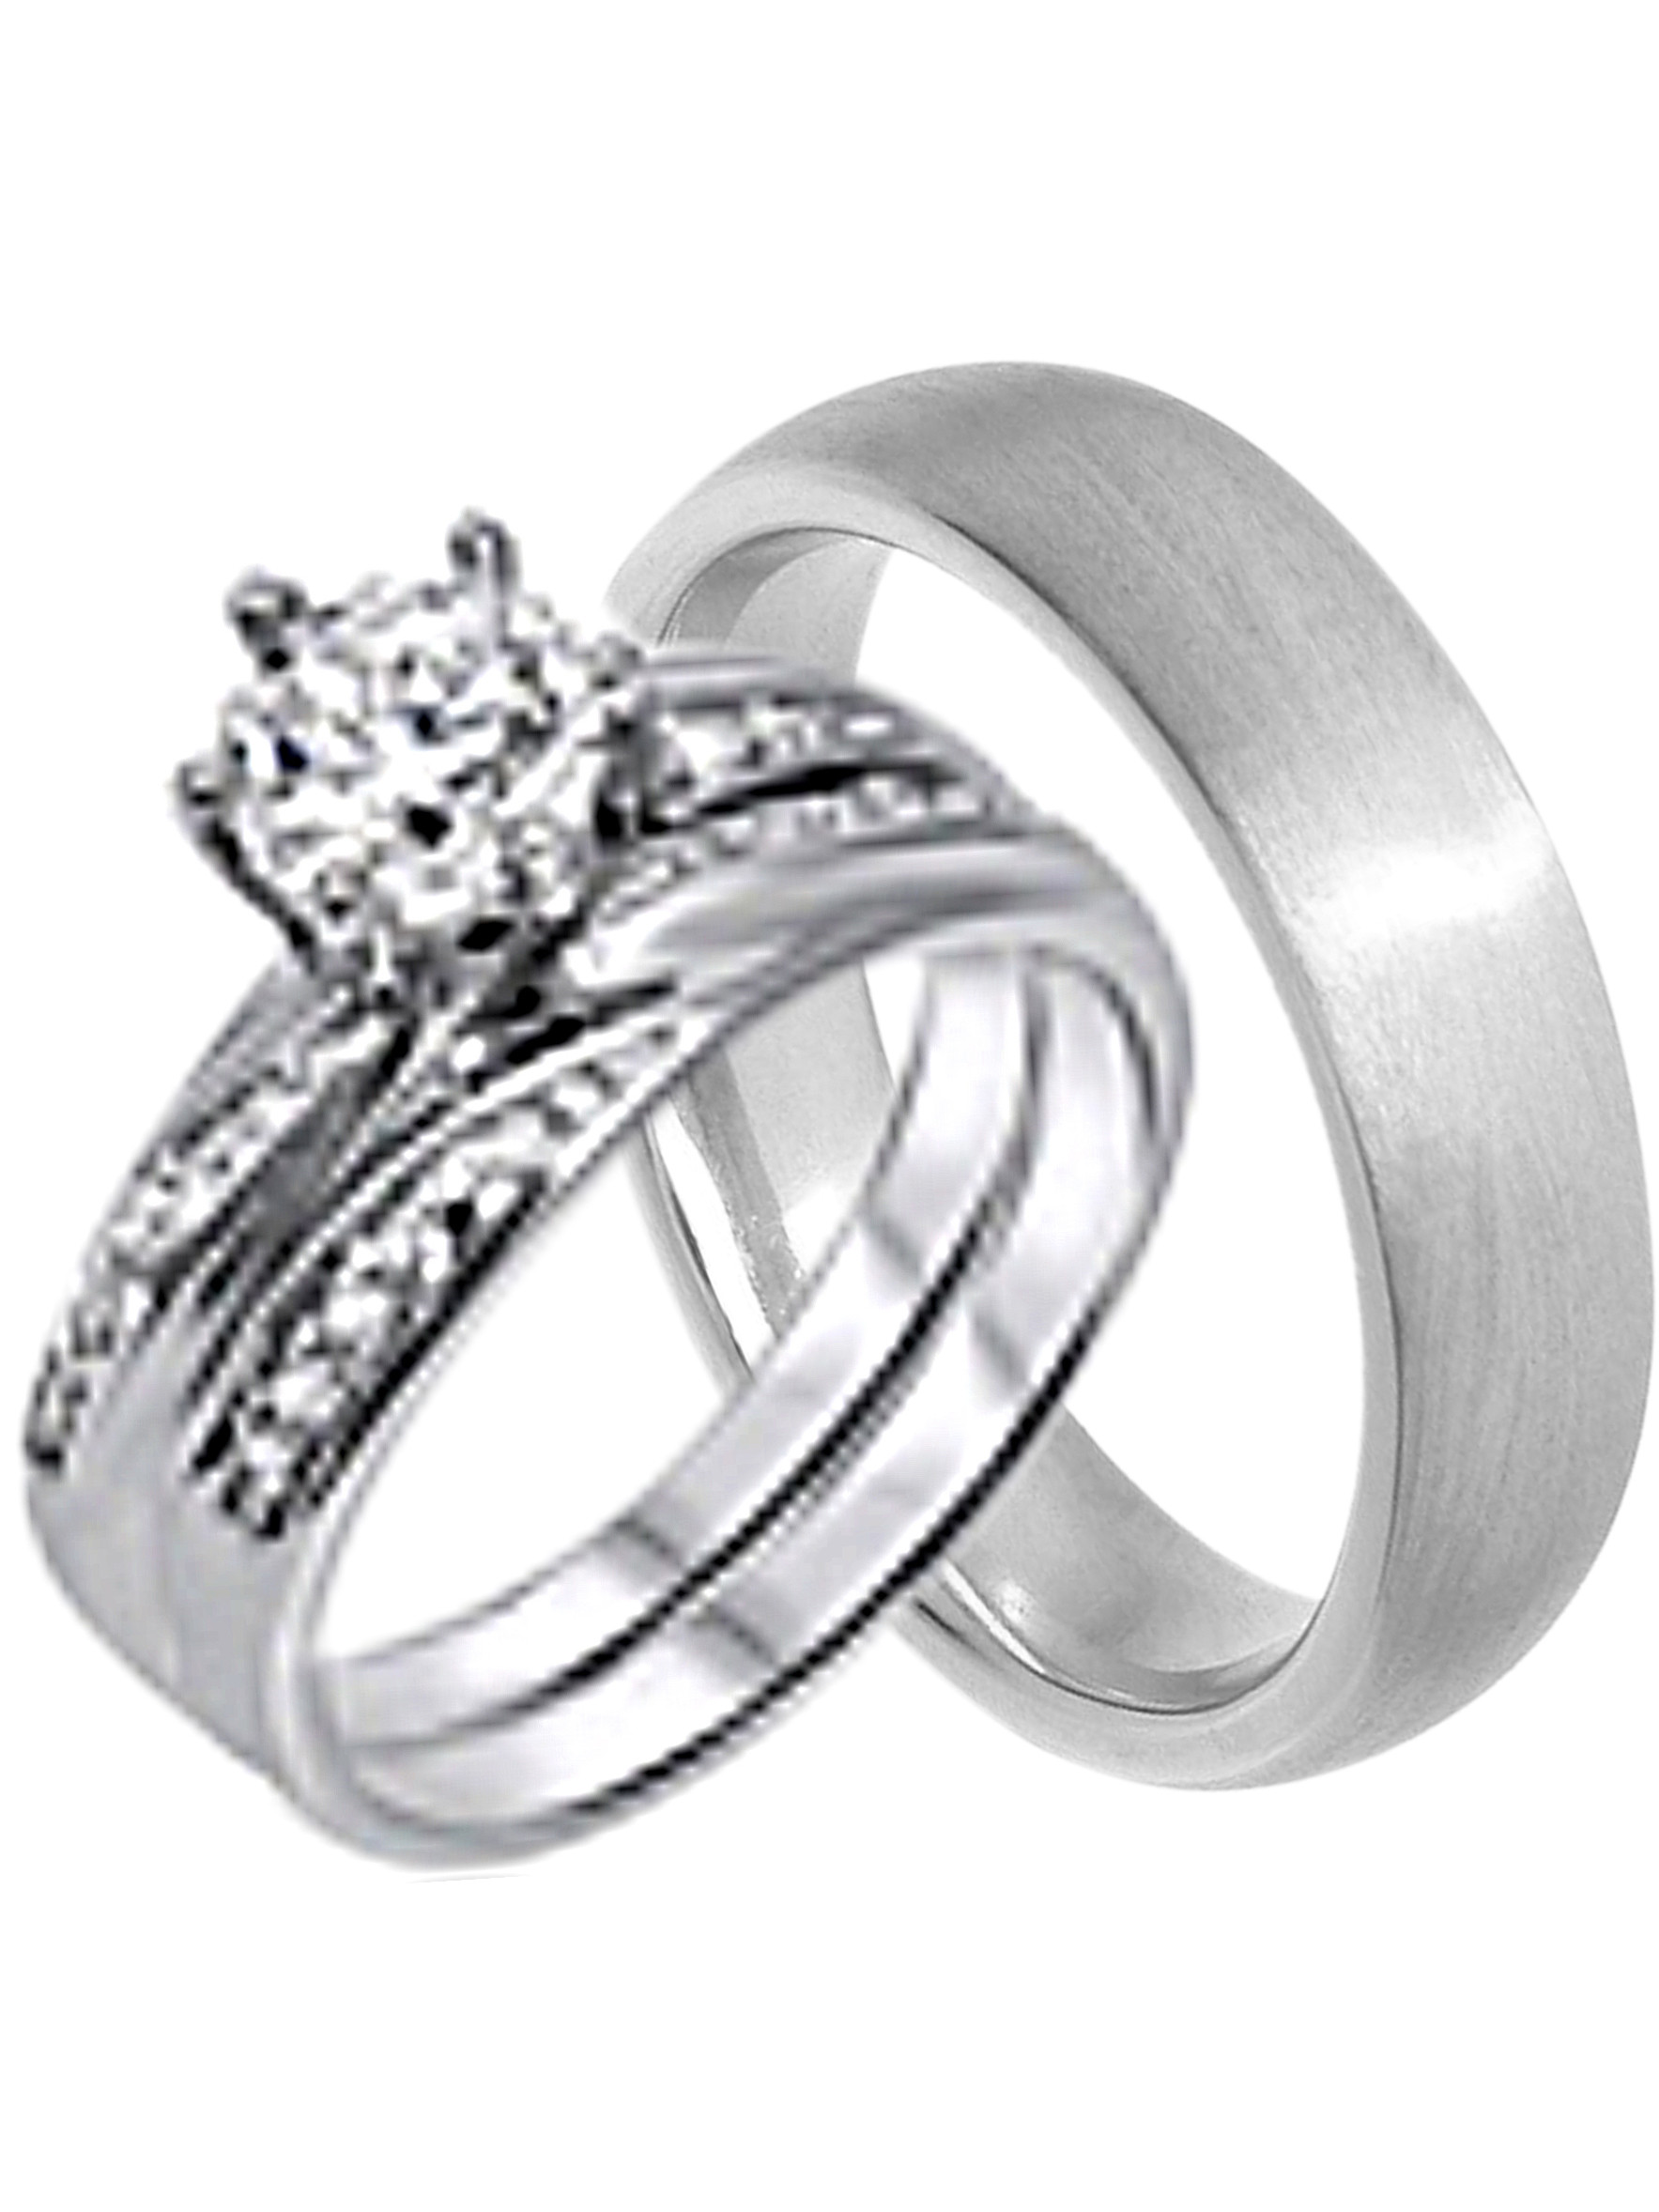 Cheap Wedding Rings For Him And Her
 His and Hers Wedding Ring Set Cheap Wedding Bands for Him